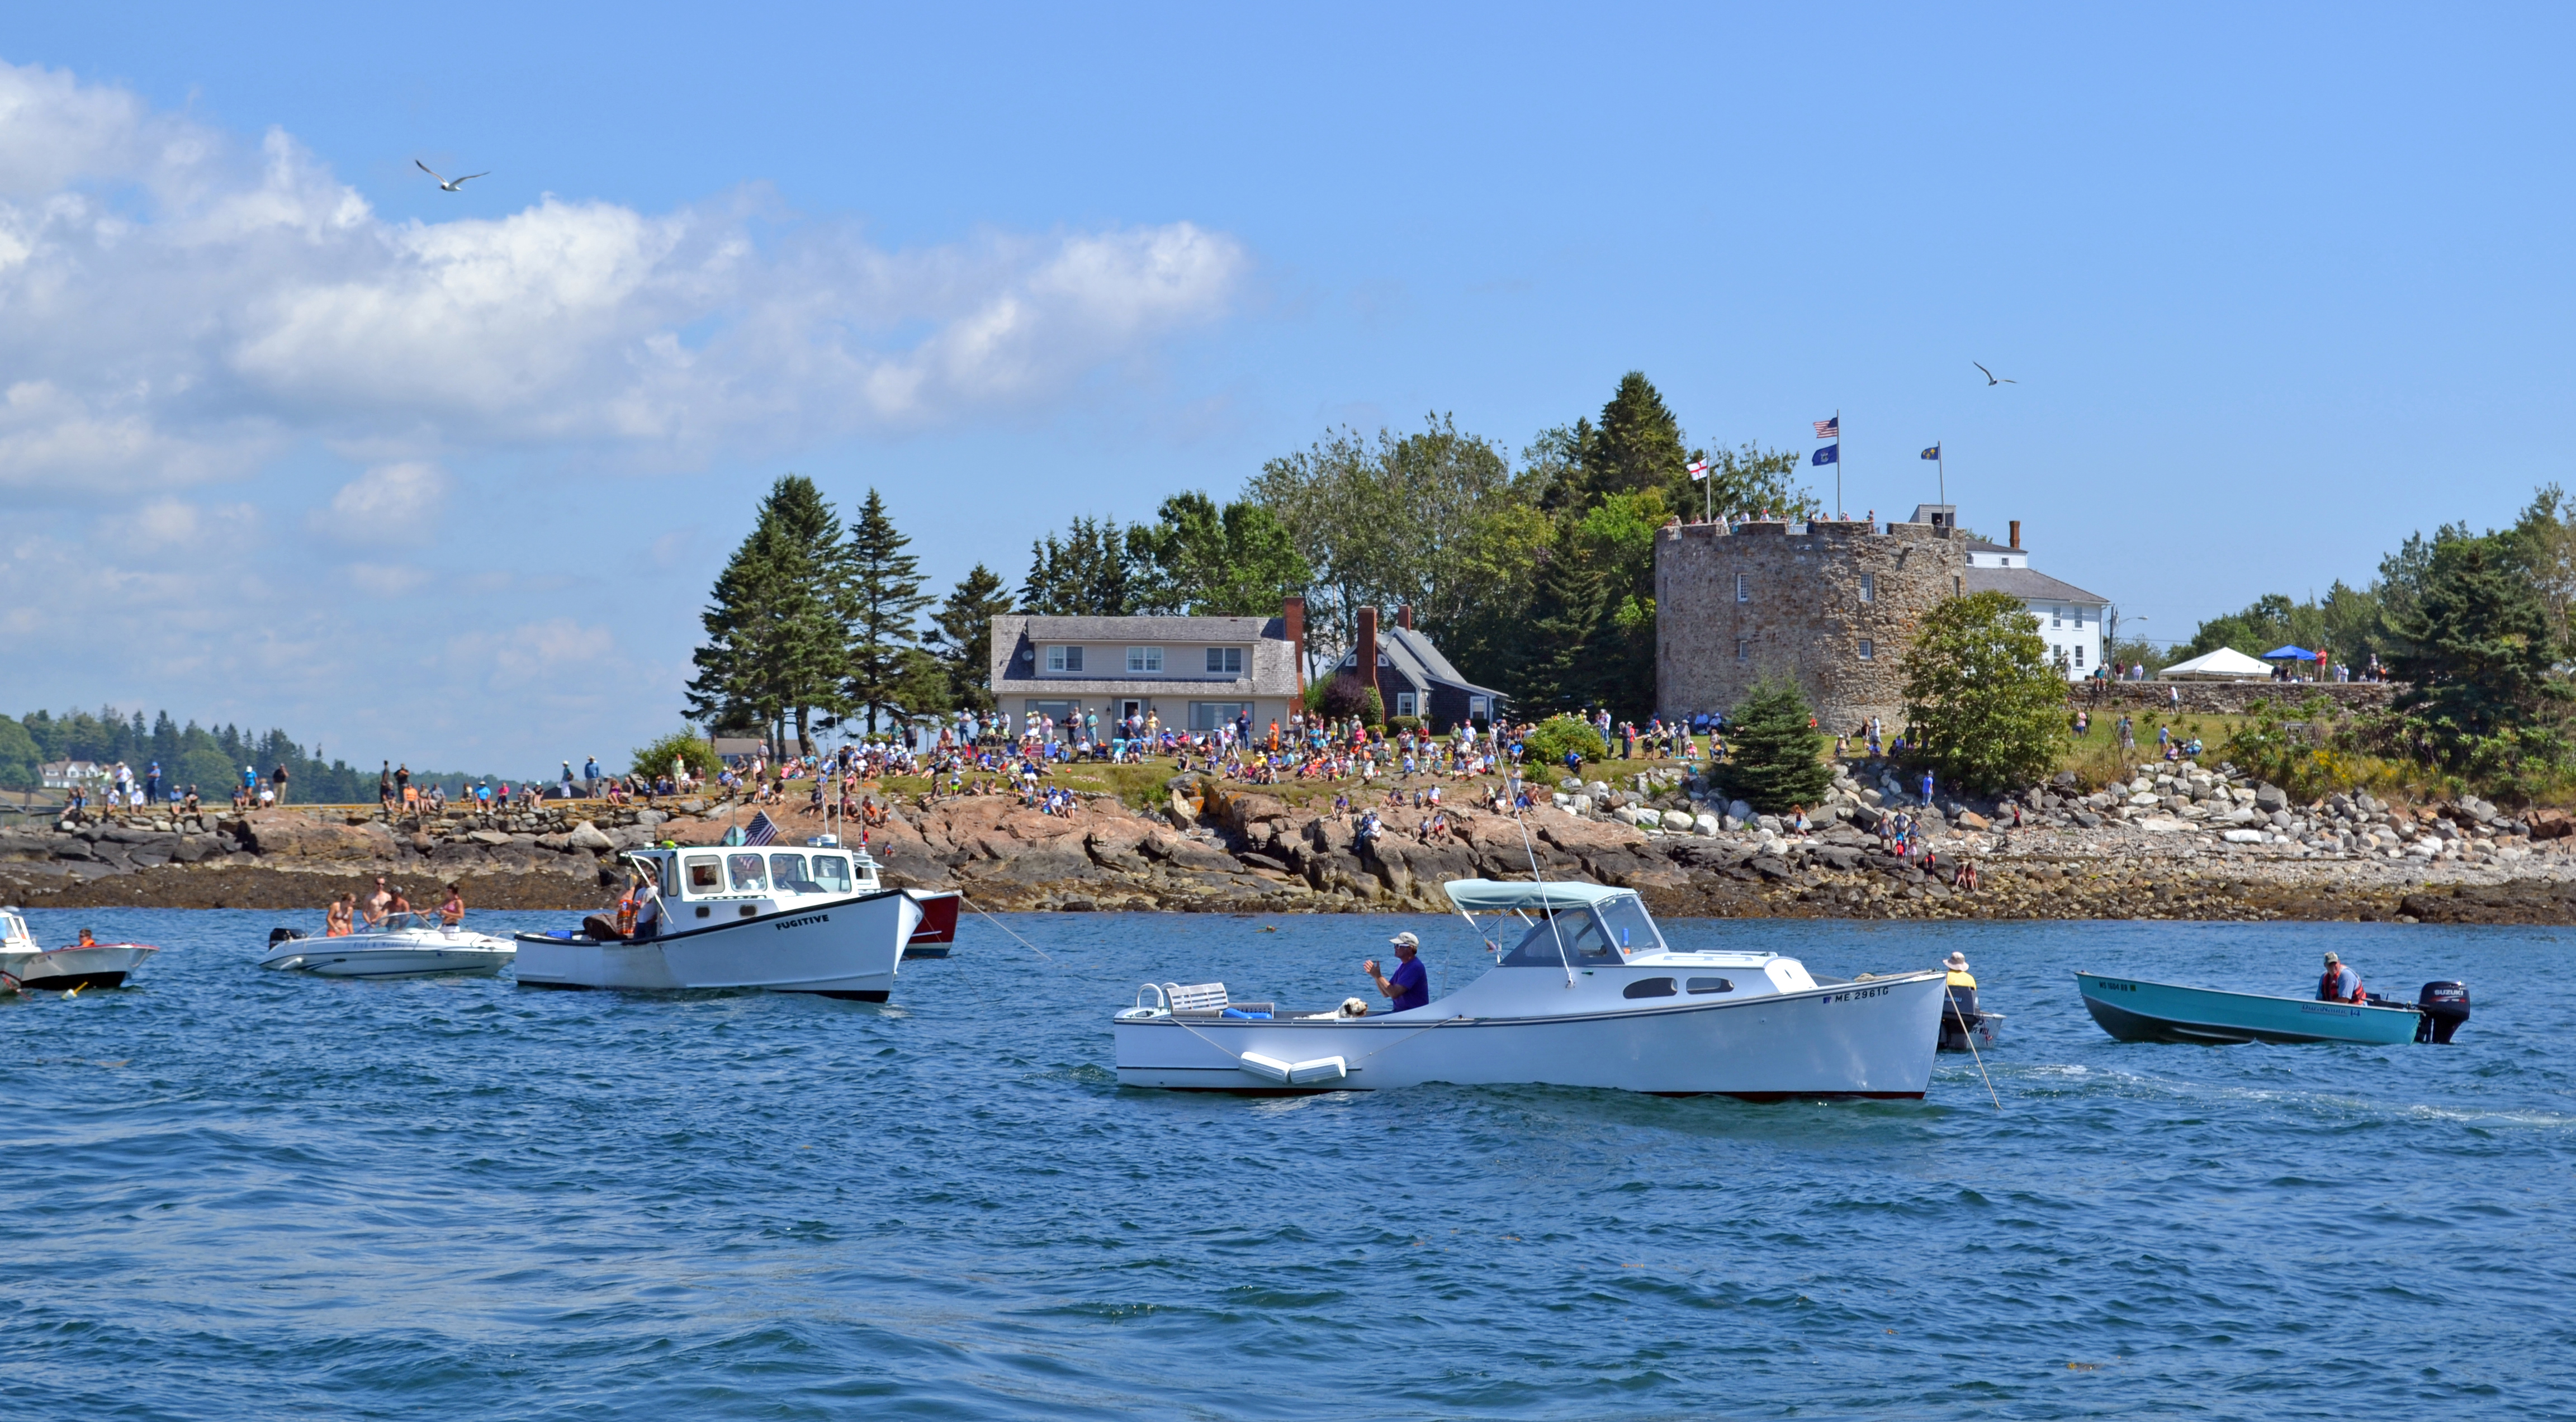 A crowd gathers at Fort William Henry and the neighboring Dodge property to watch the 31st annual Merritt Brackett Lobster Boat Races in Bristol on Sunday, Aug. 13. (Abigail Adams photo)